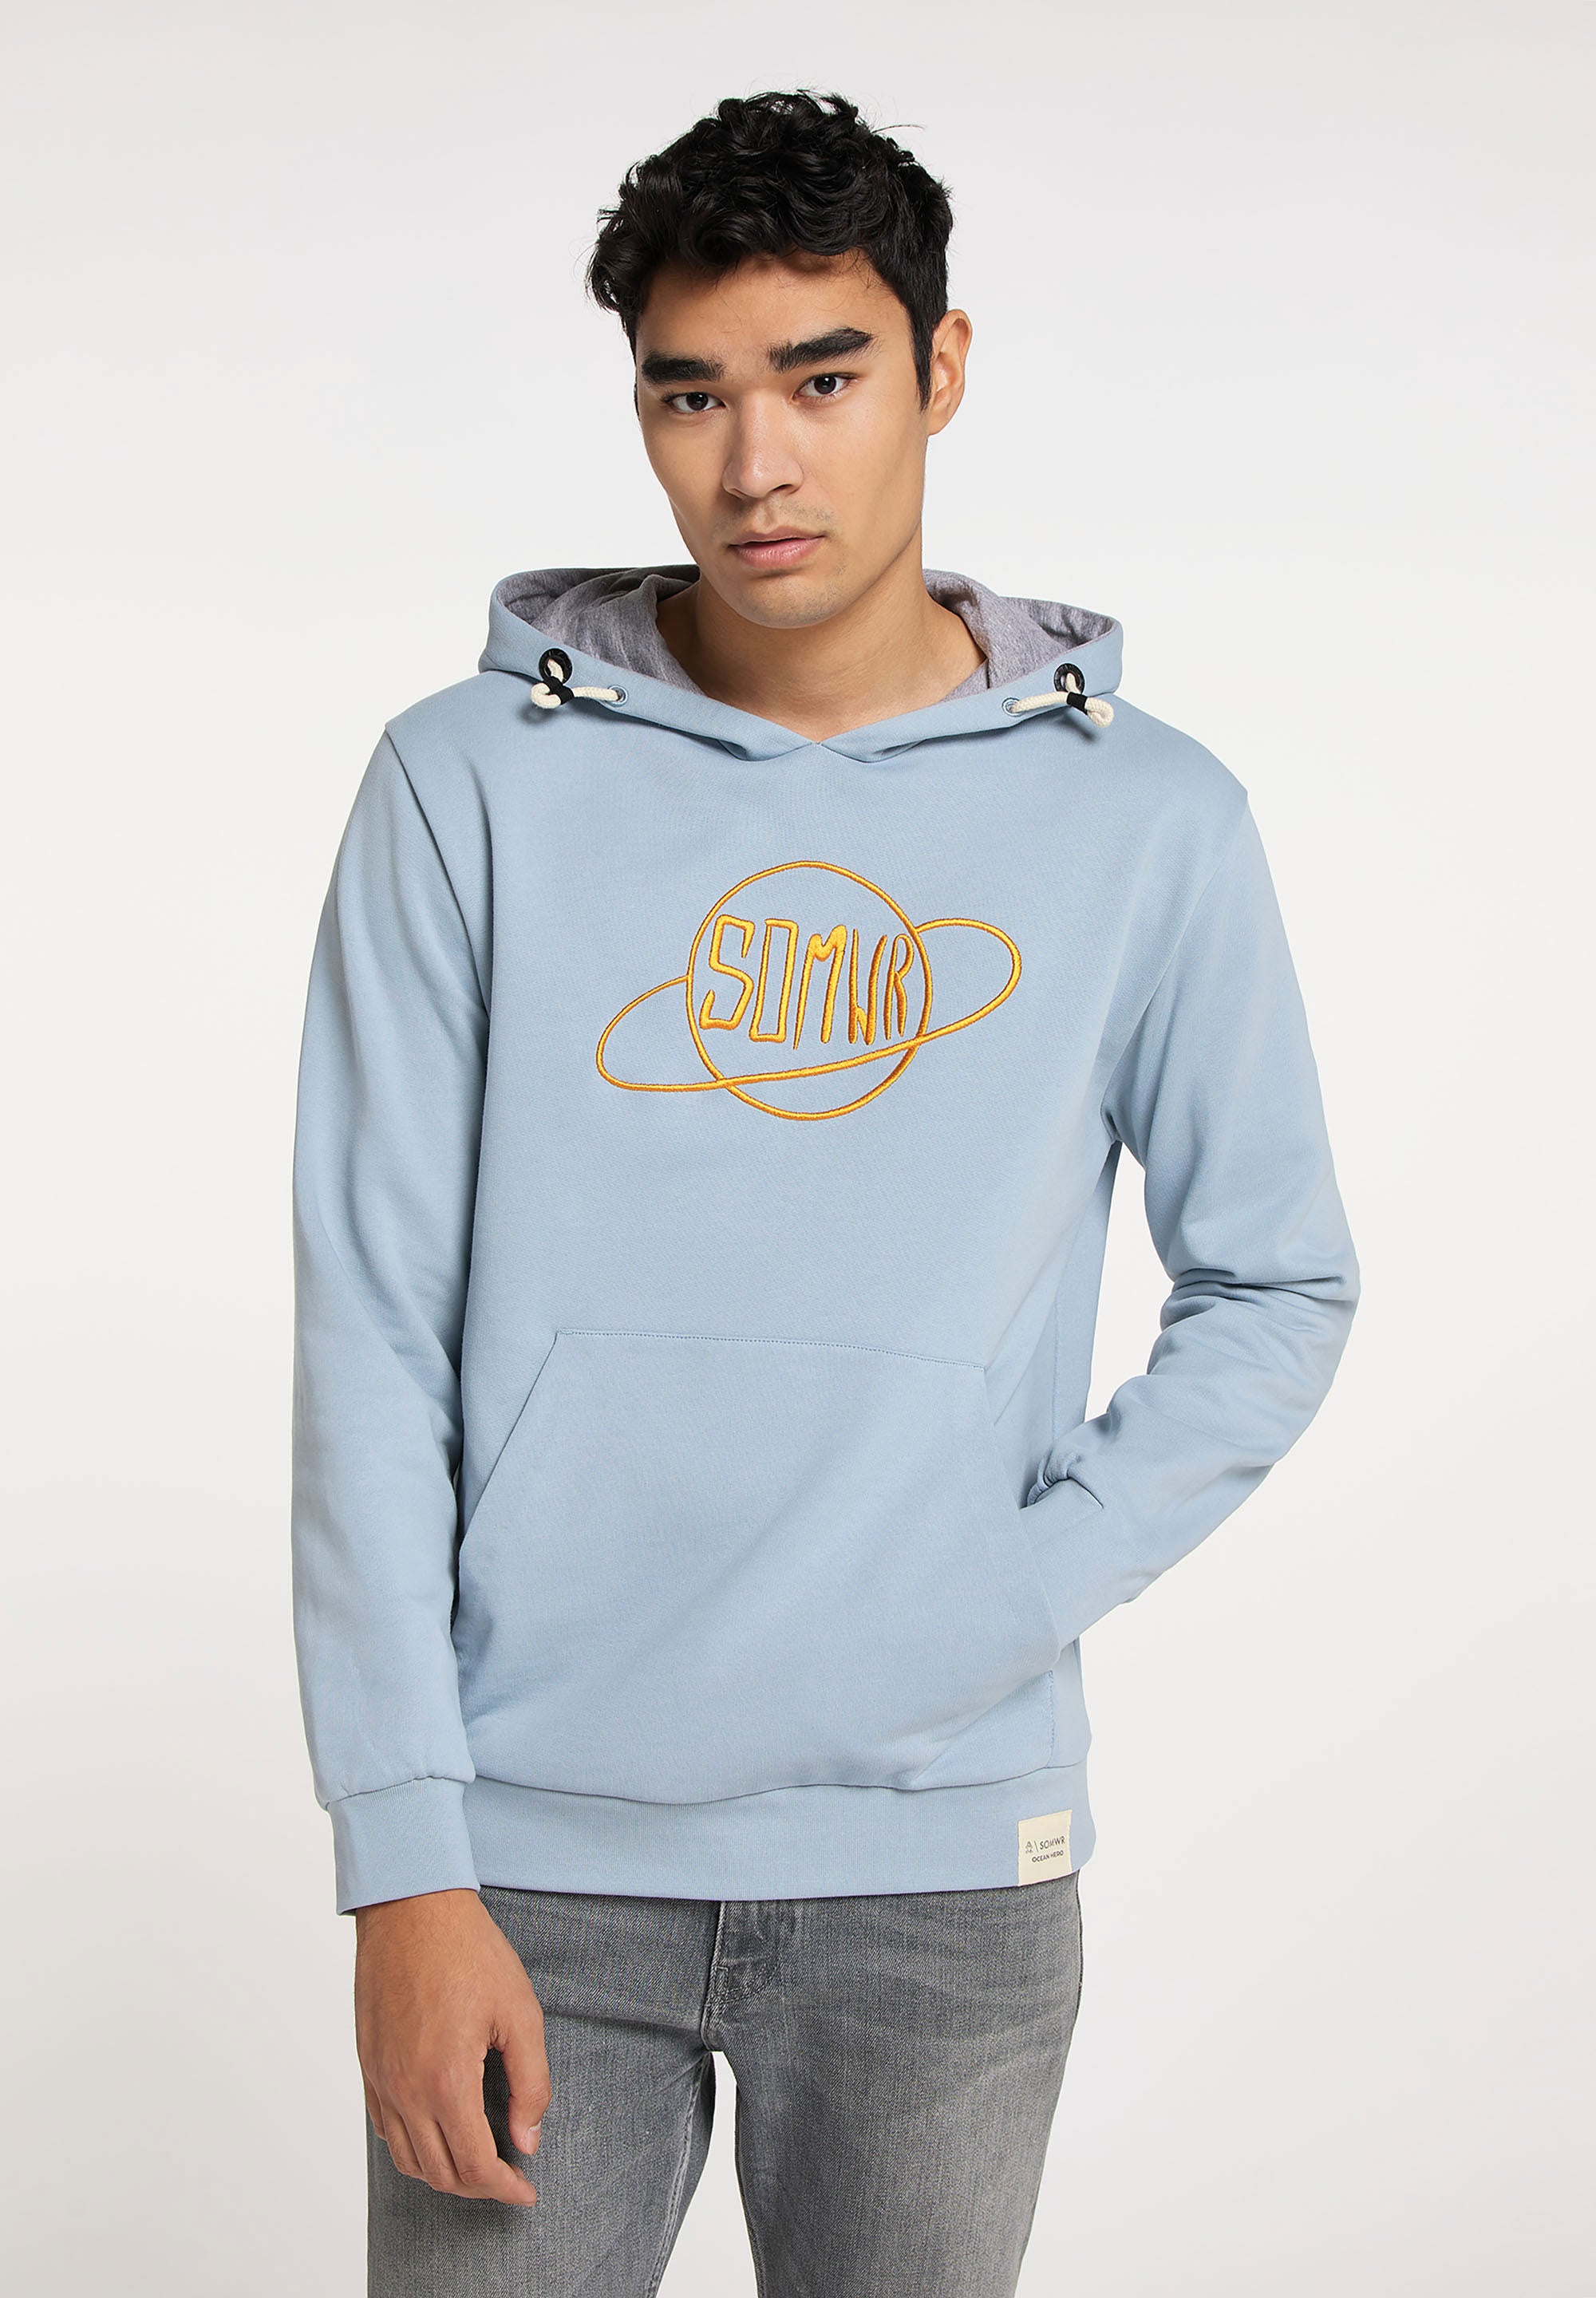 SOMWR SUSTAIN THE PLANET HOODIE Hoodie NVY007